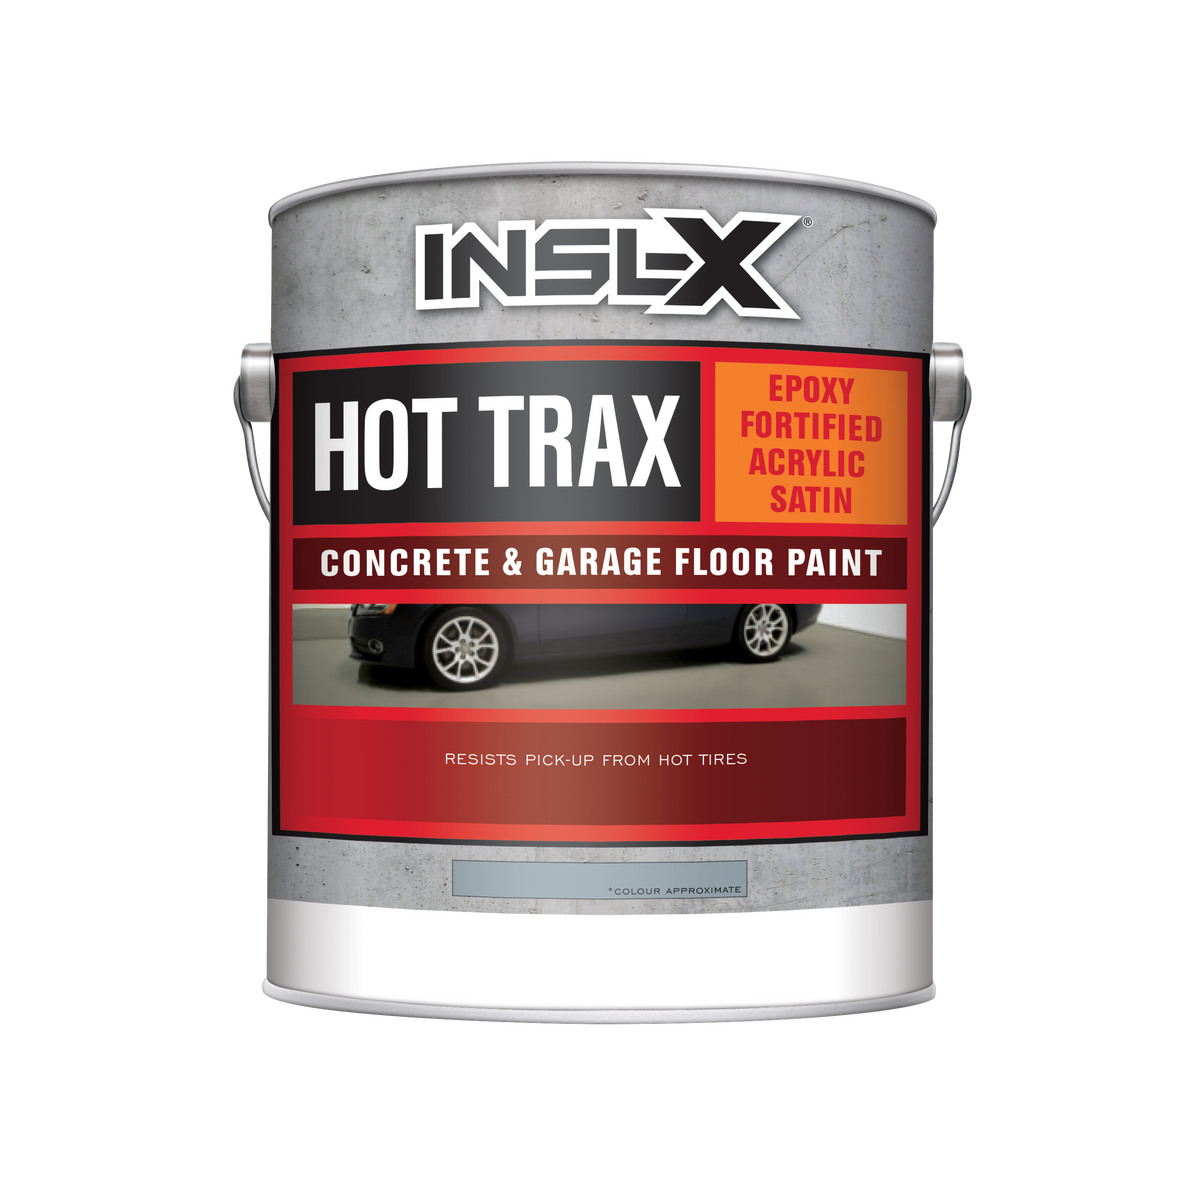 INSL-X HOT TRAX - ACRYLIC SATIN CONCRETE & GARAGE FLOOR PAINT - The Paint People